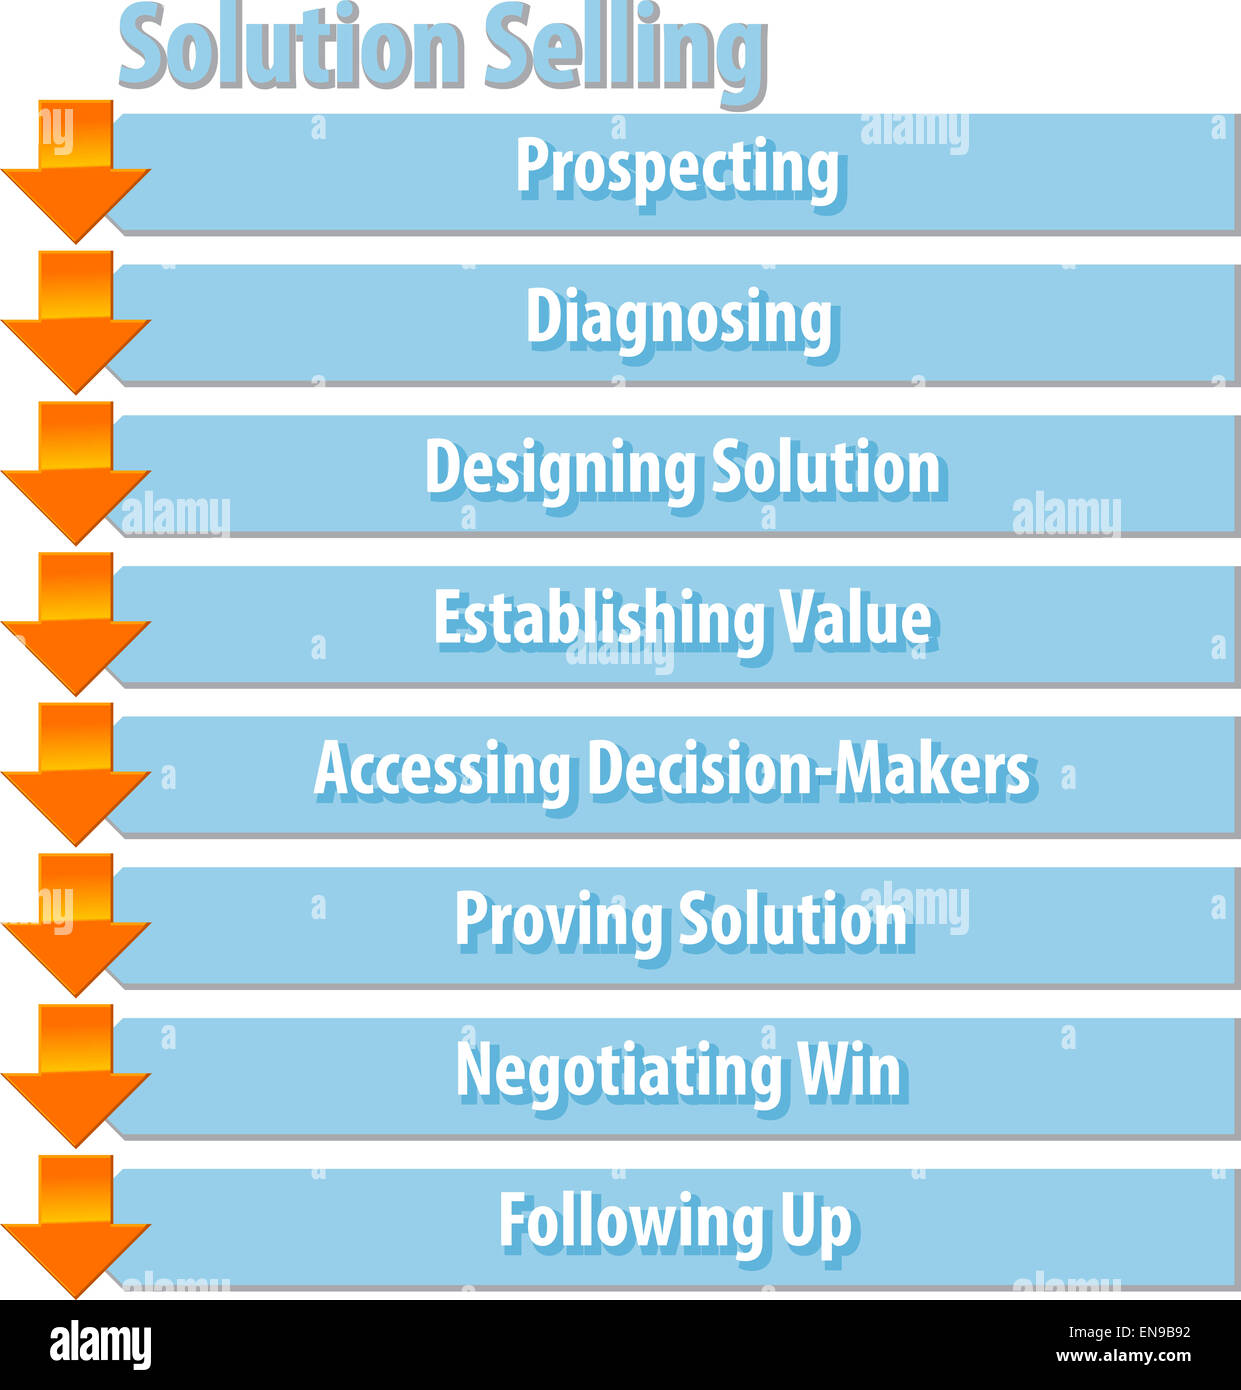 business strategy concept infographic diagram illustration of solution selling process steps Stock Photo